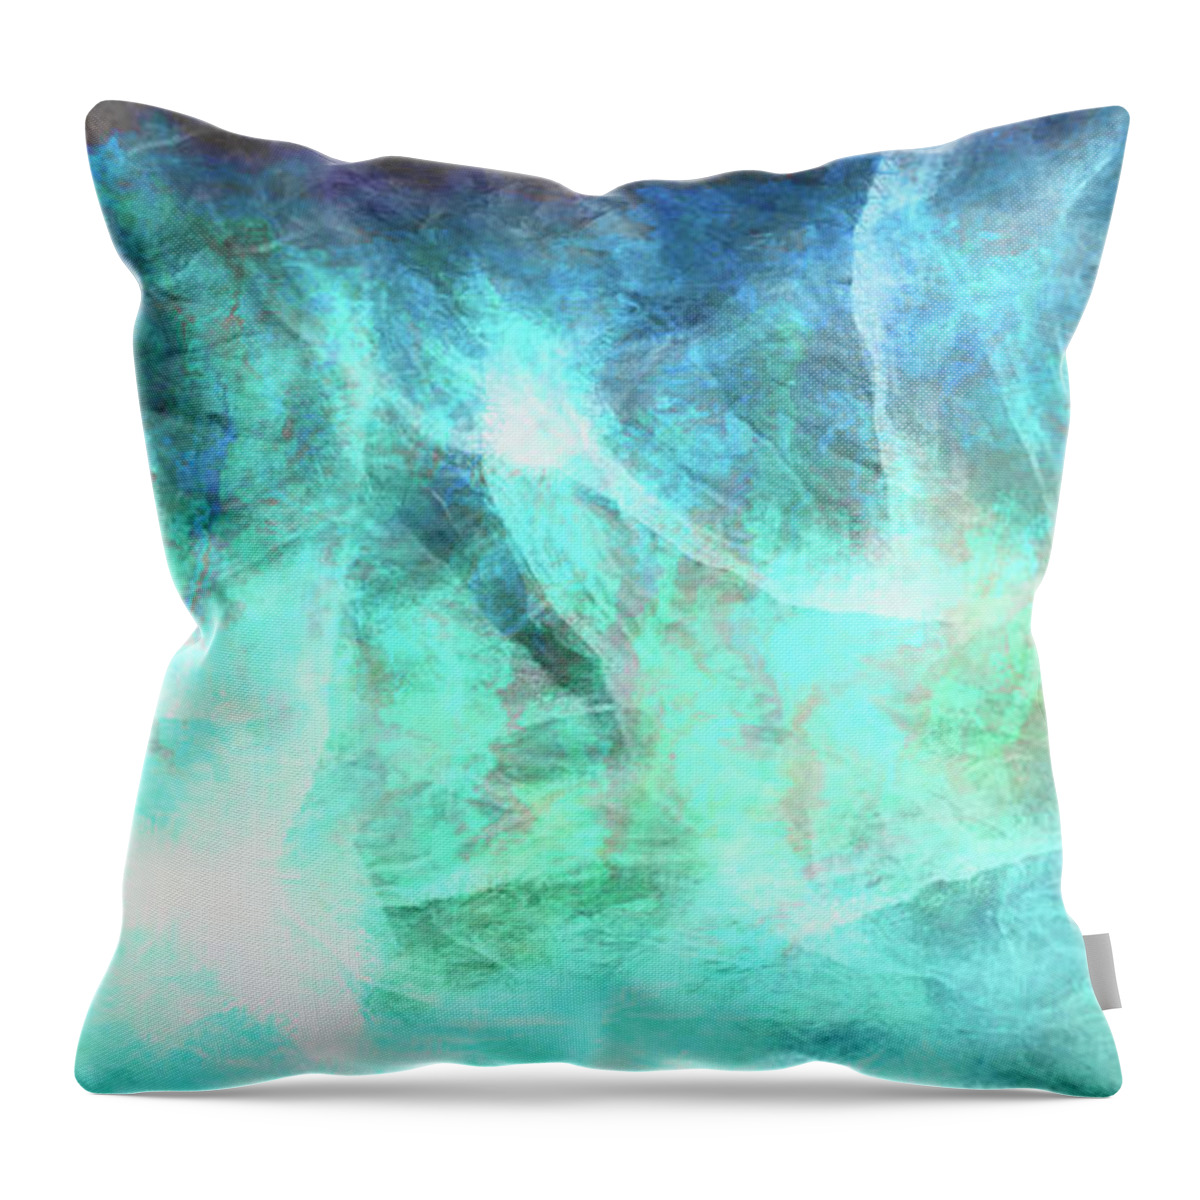 Abstract Art Throw Pillow featuring the painting Life Is A Gift - Abstract Art by Jaison Cianelli